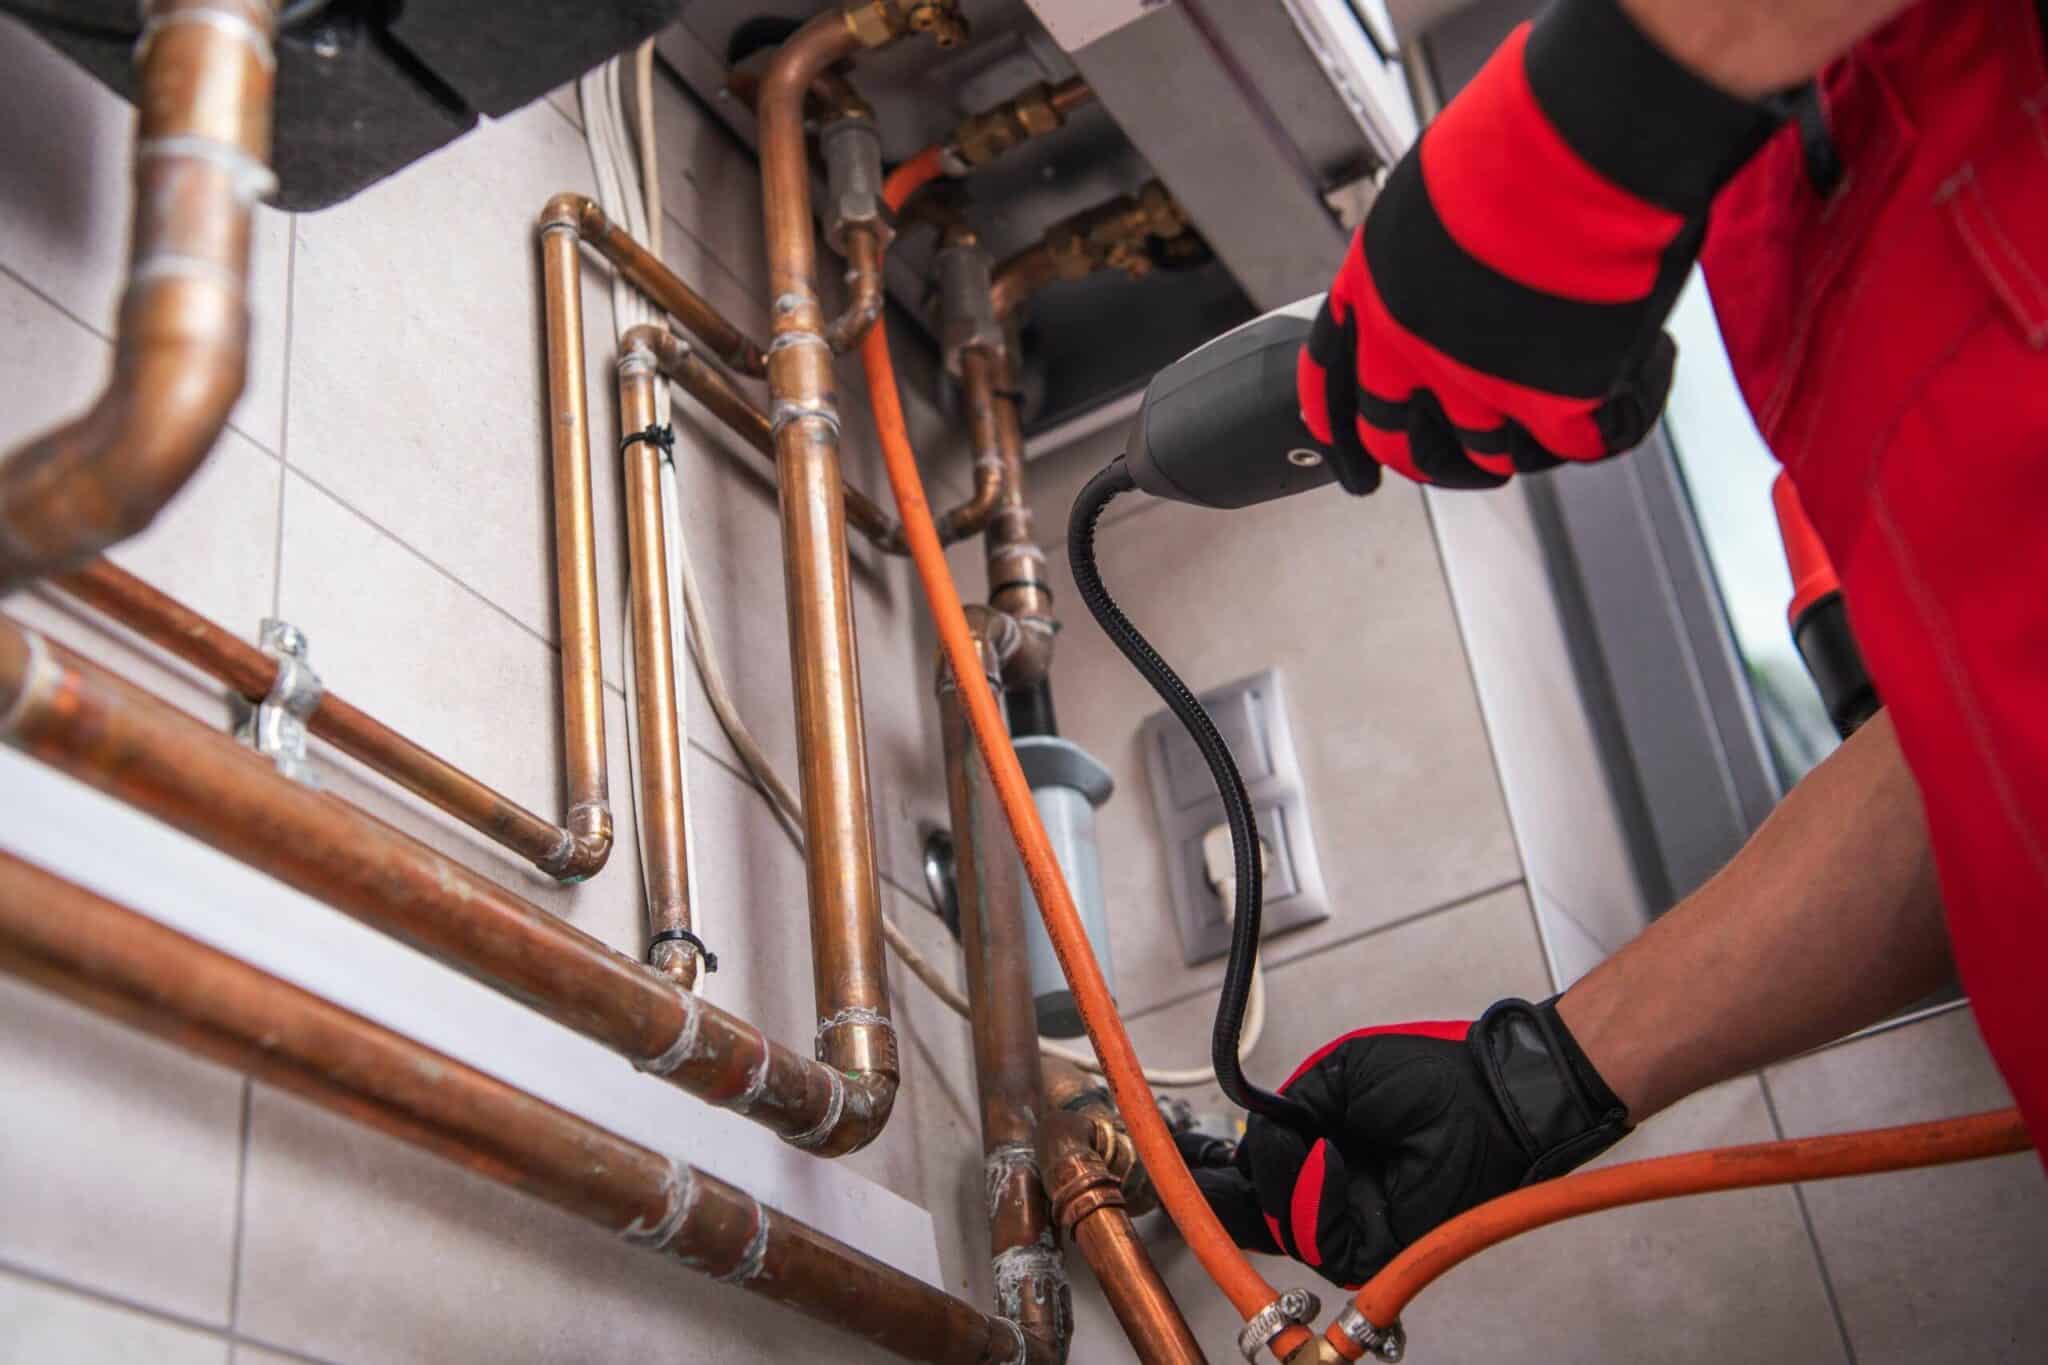 How To Keep Your Plumbing System Safe In Winter